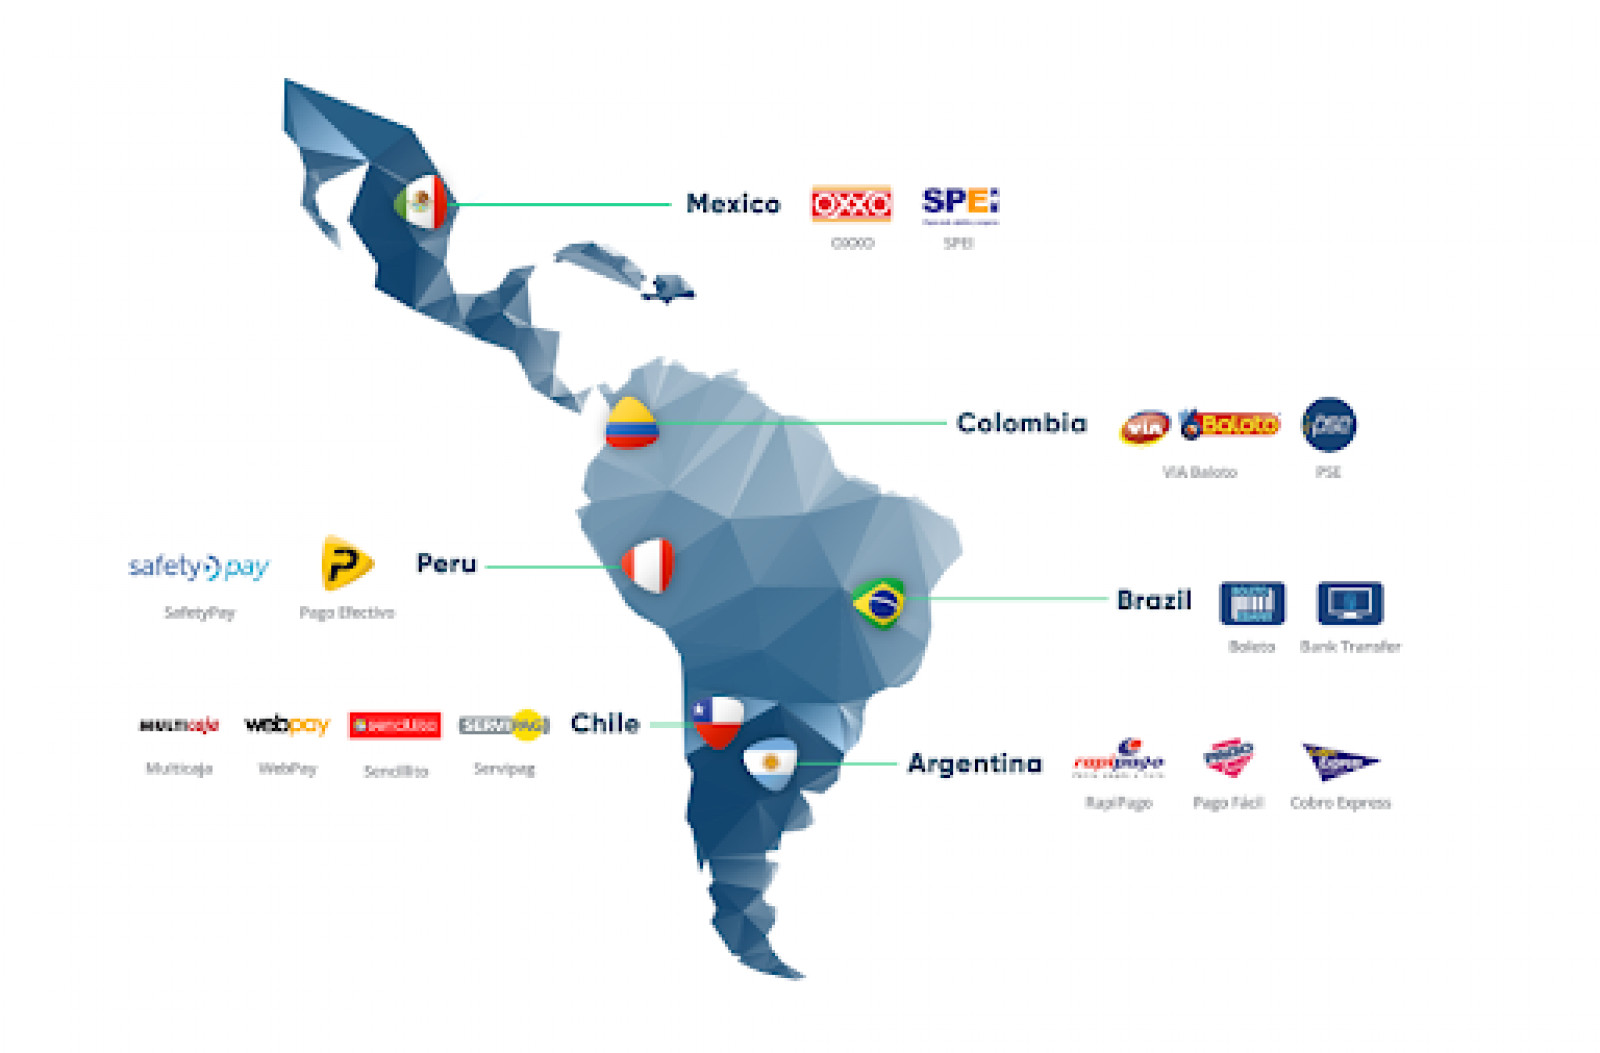 Payment preferences in LatAm